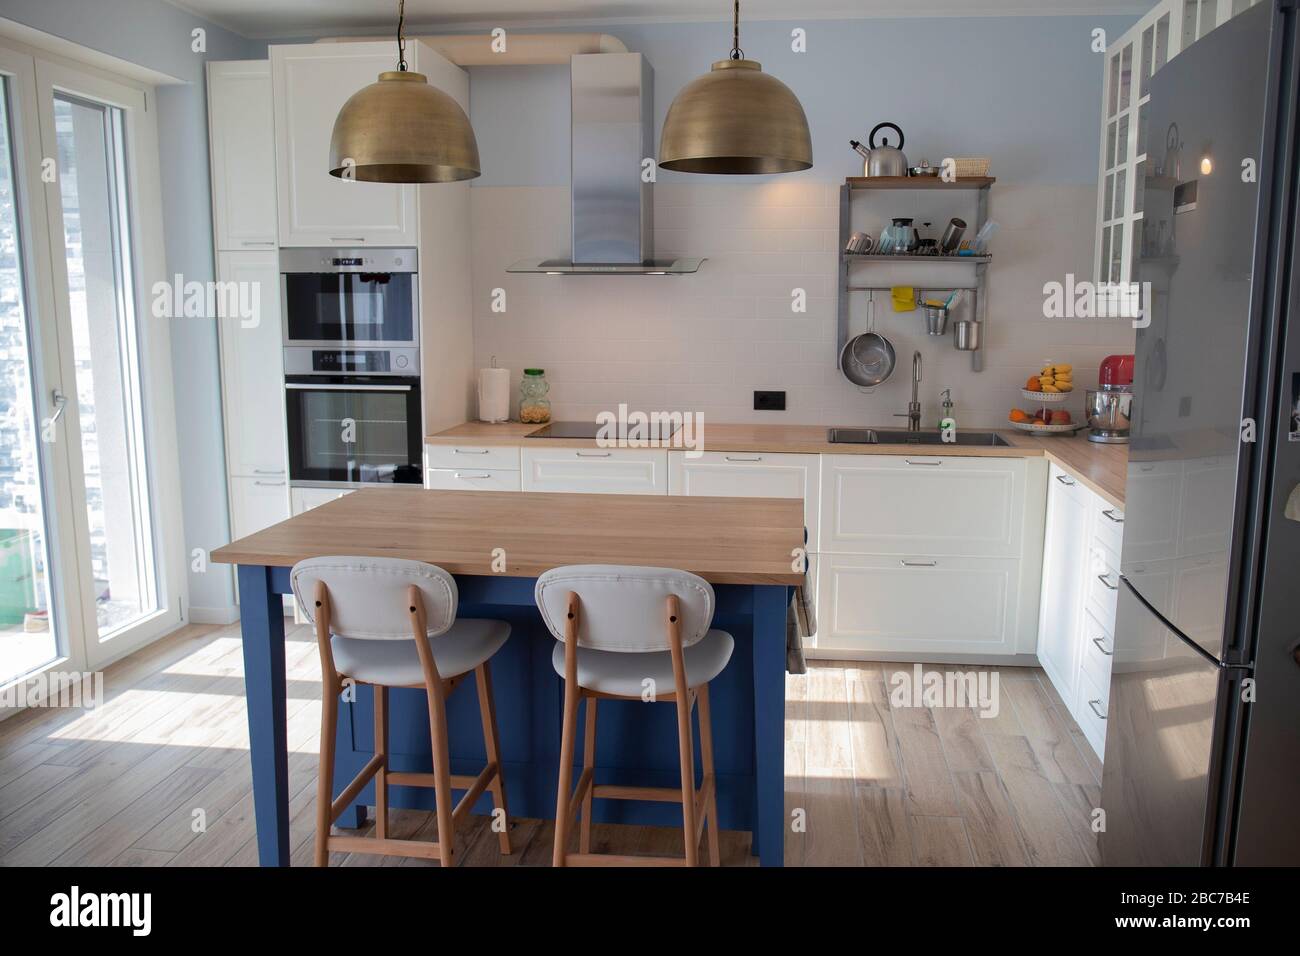 White, bright kitchen with blue island and double brass pendant lights. Stock Photo